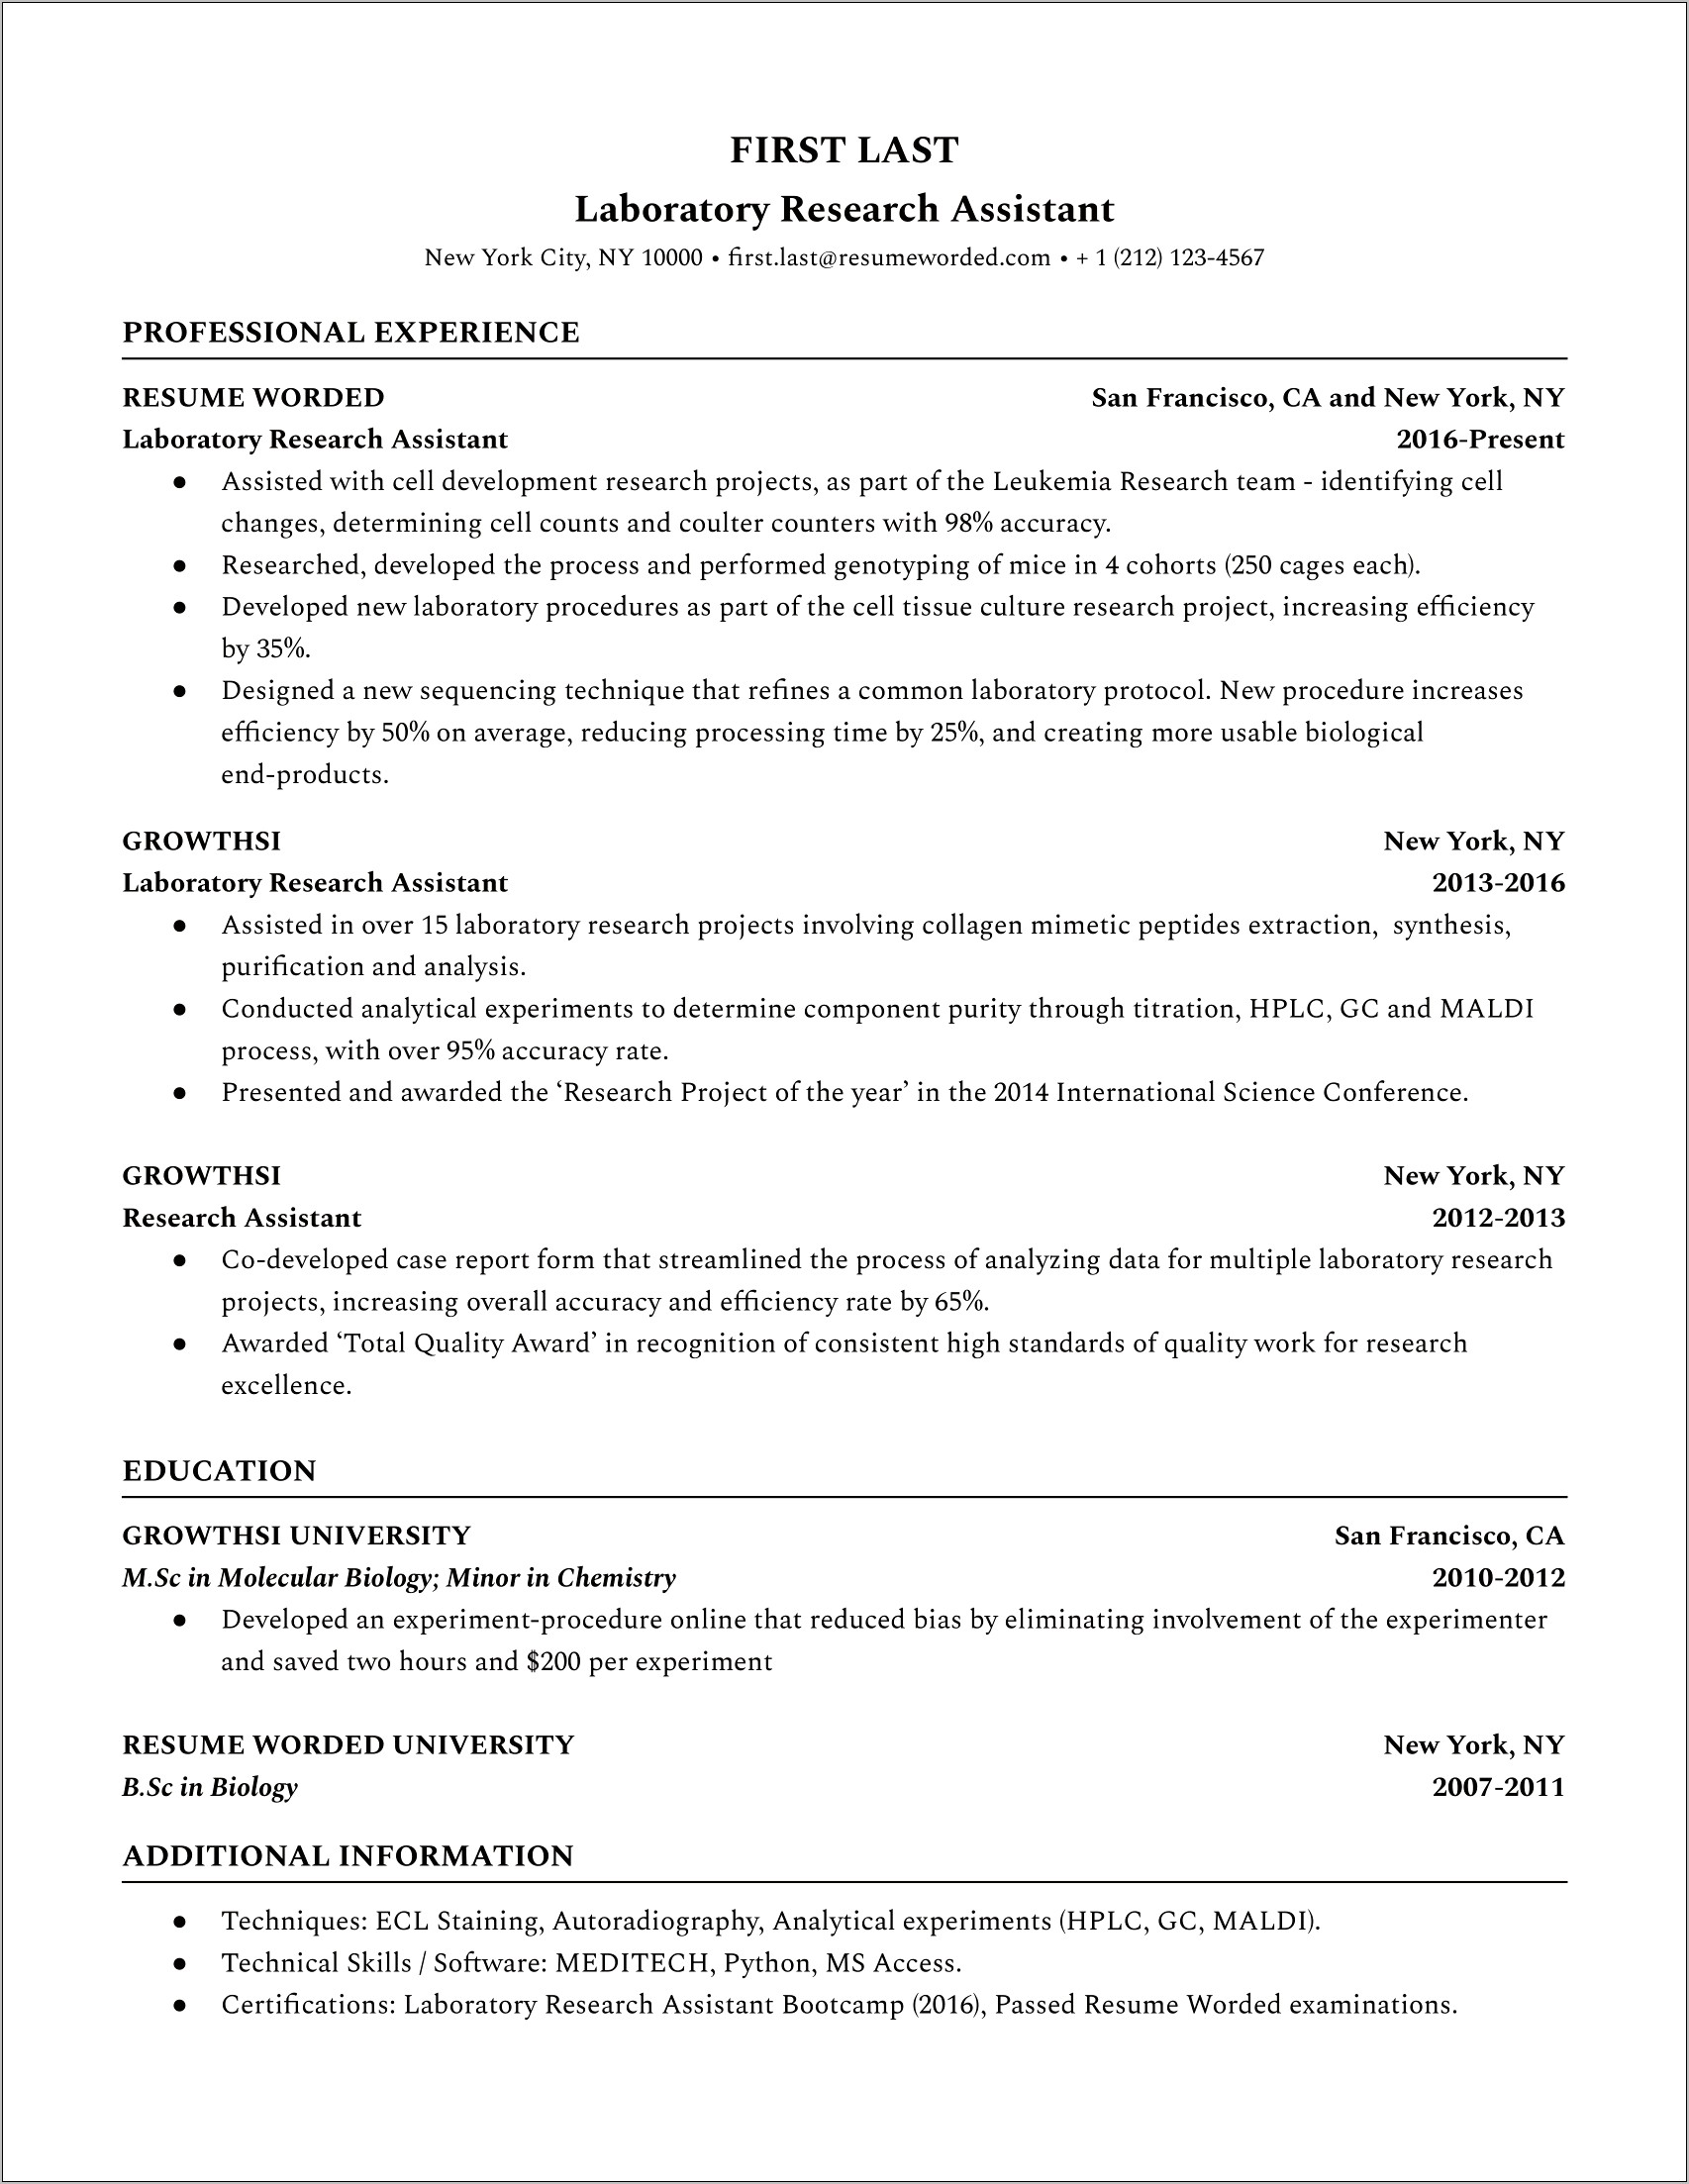 Executive Assistant Skills To List On Resume